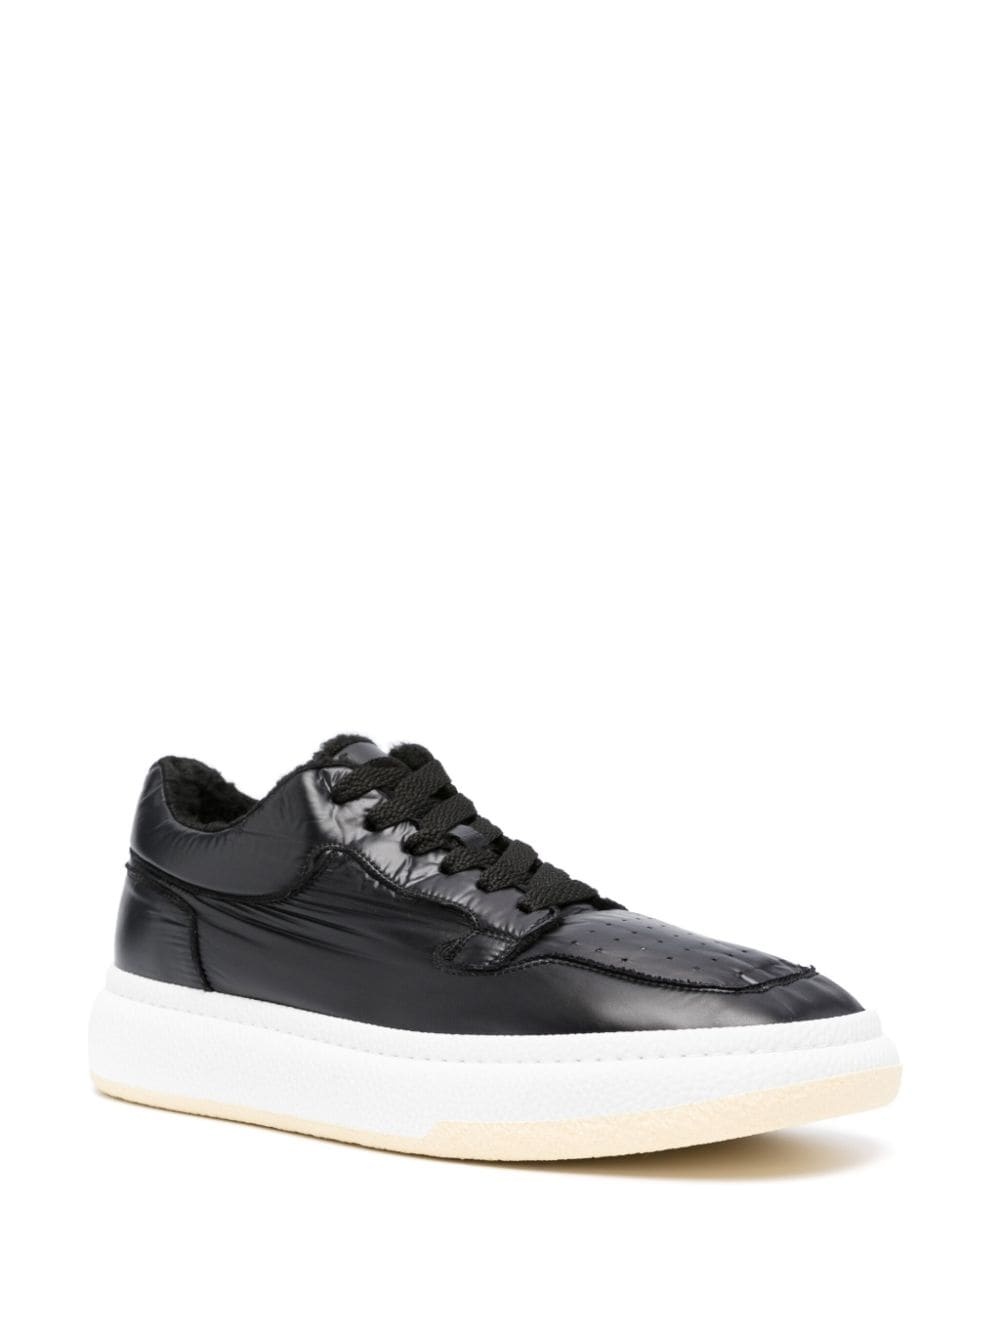 shearling-lining patent leather sneakers - 2